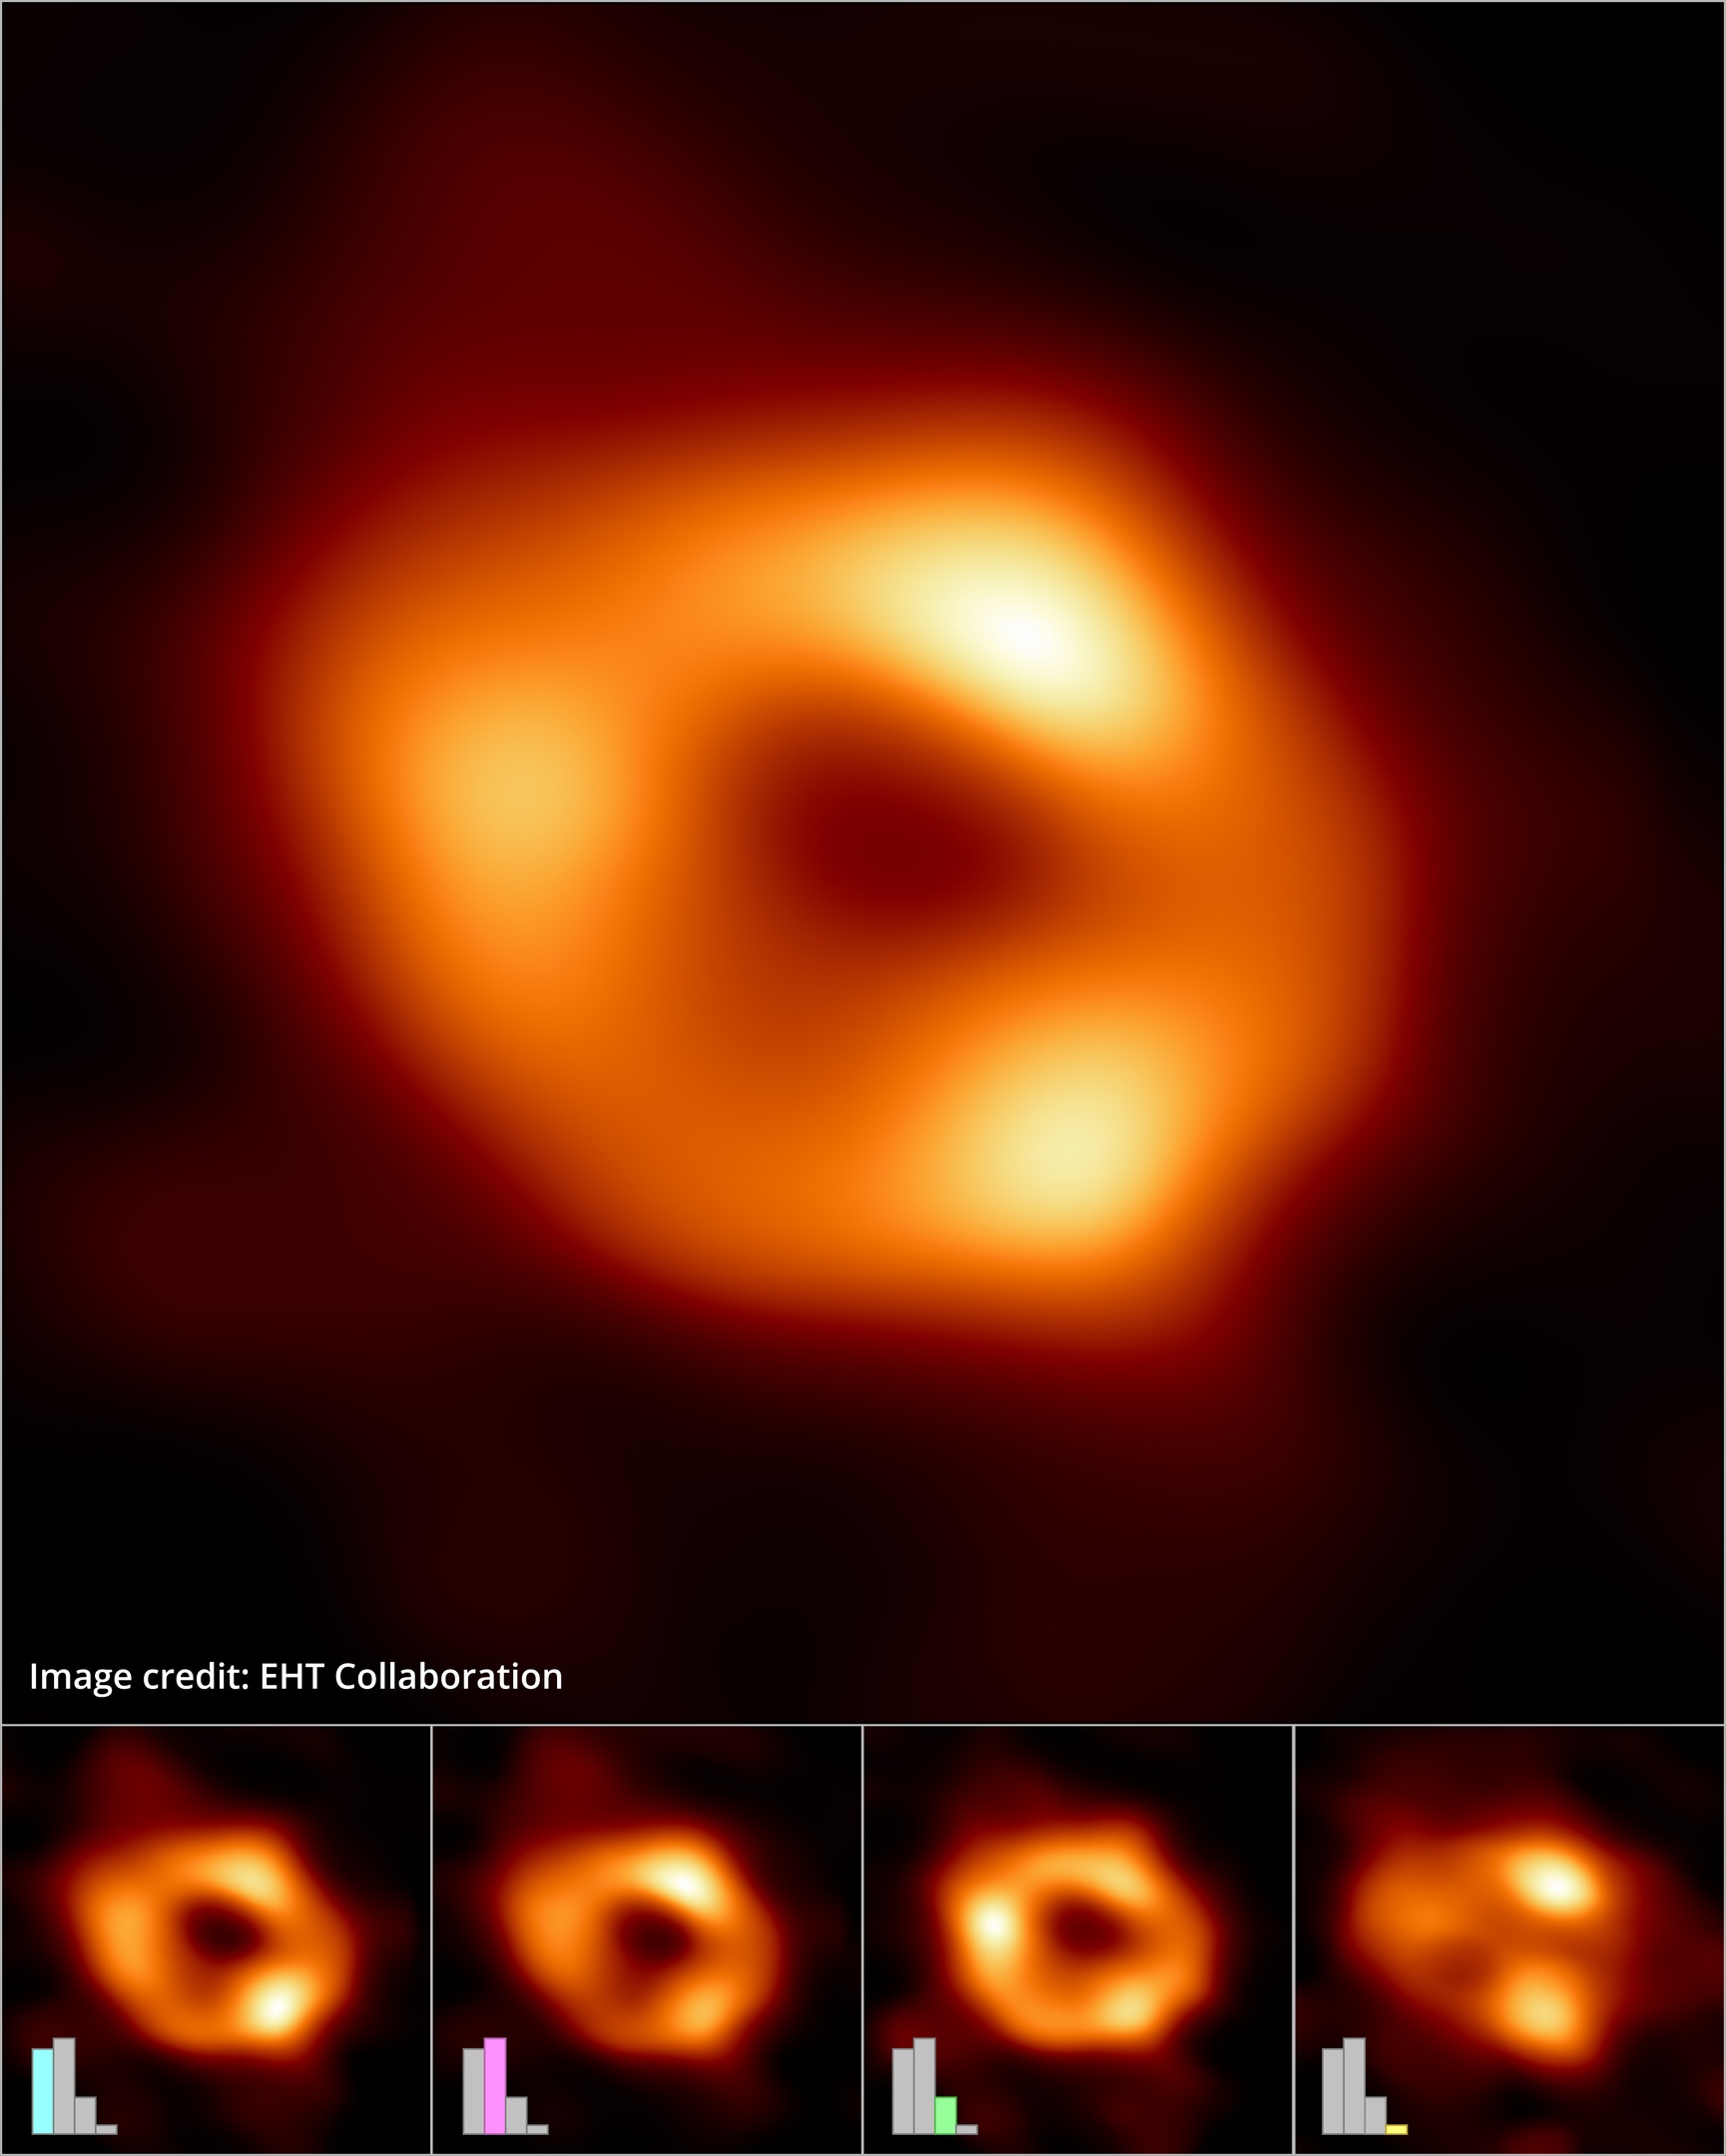 Scientific image of black hole with four other black hole images below